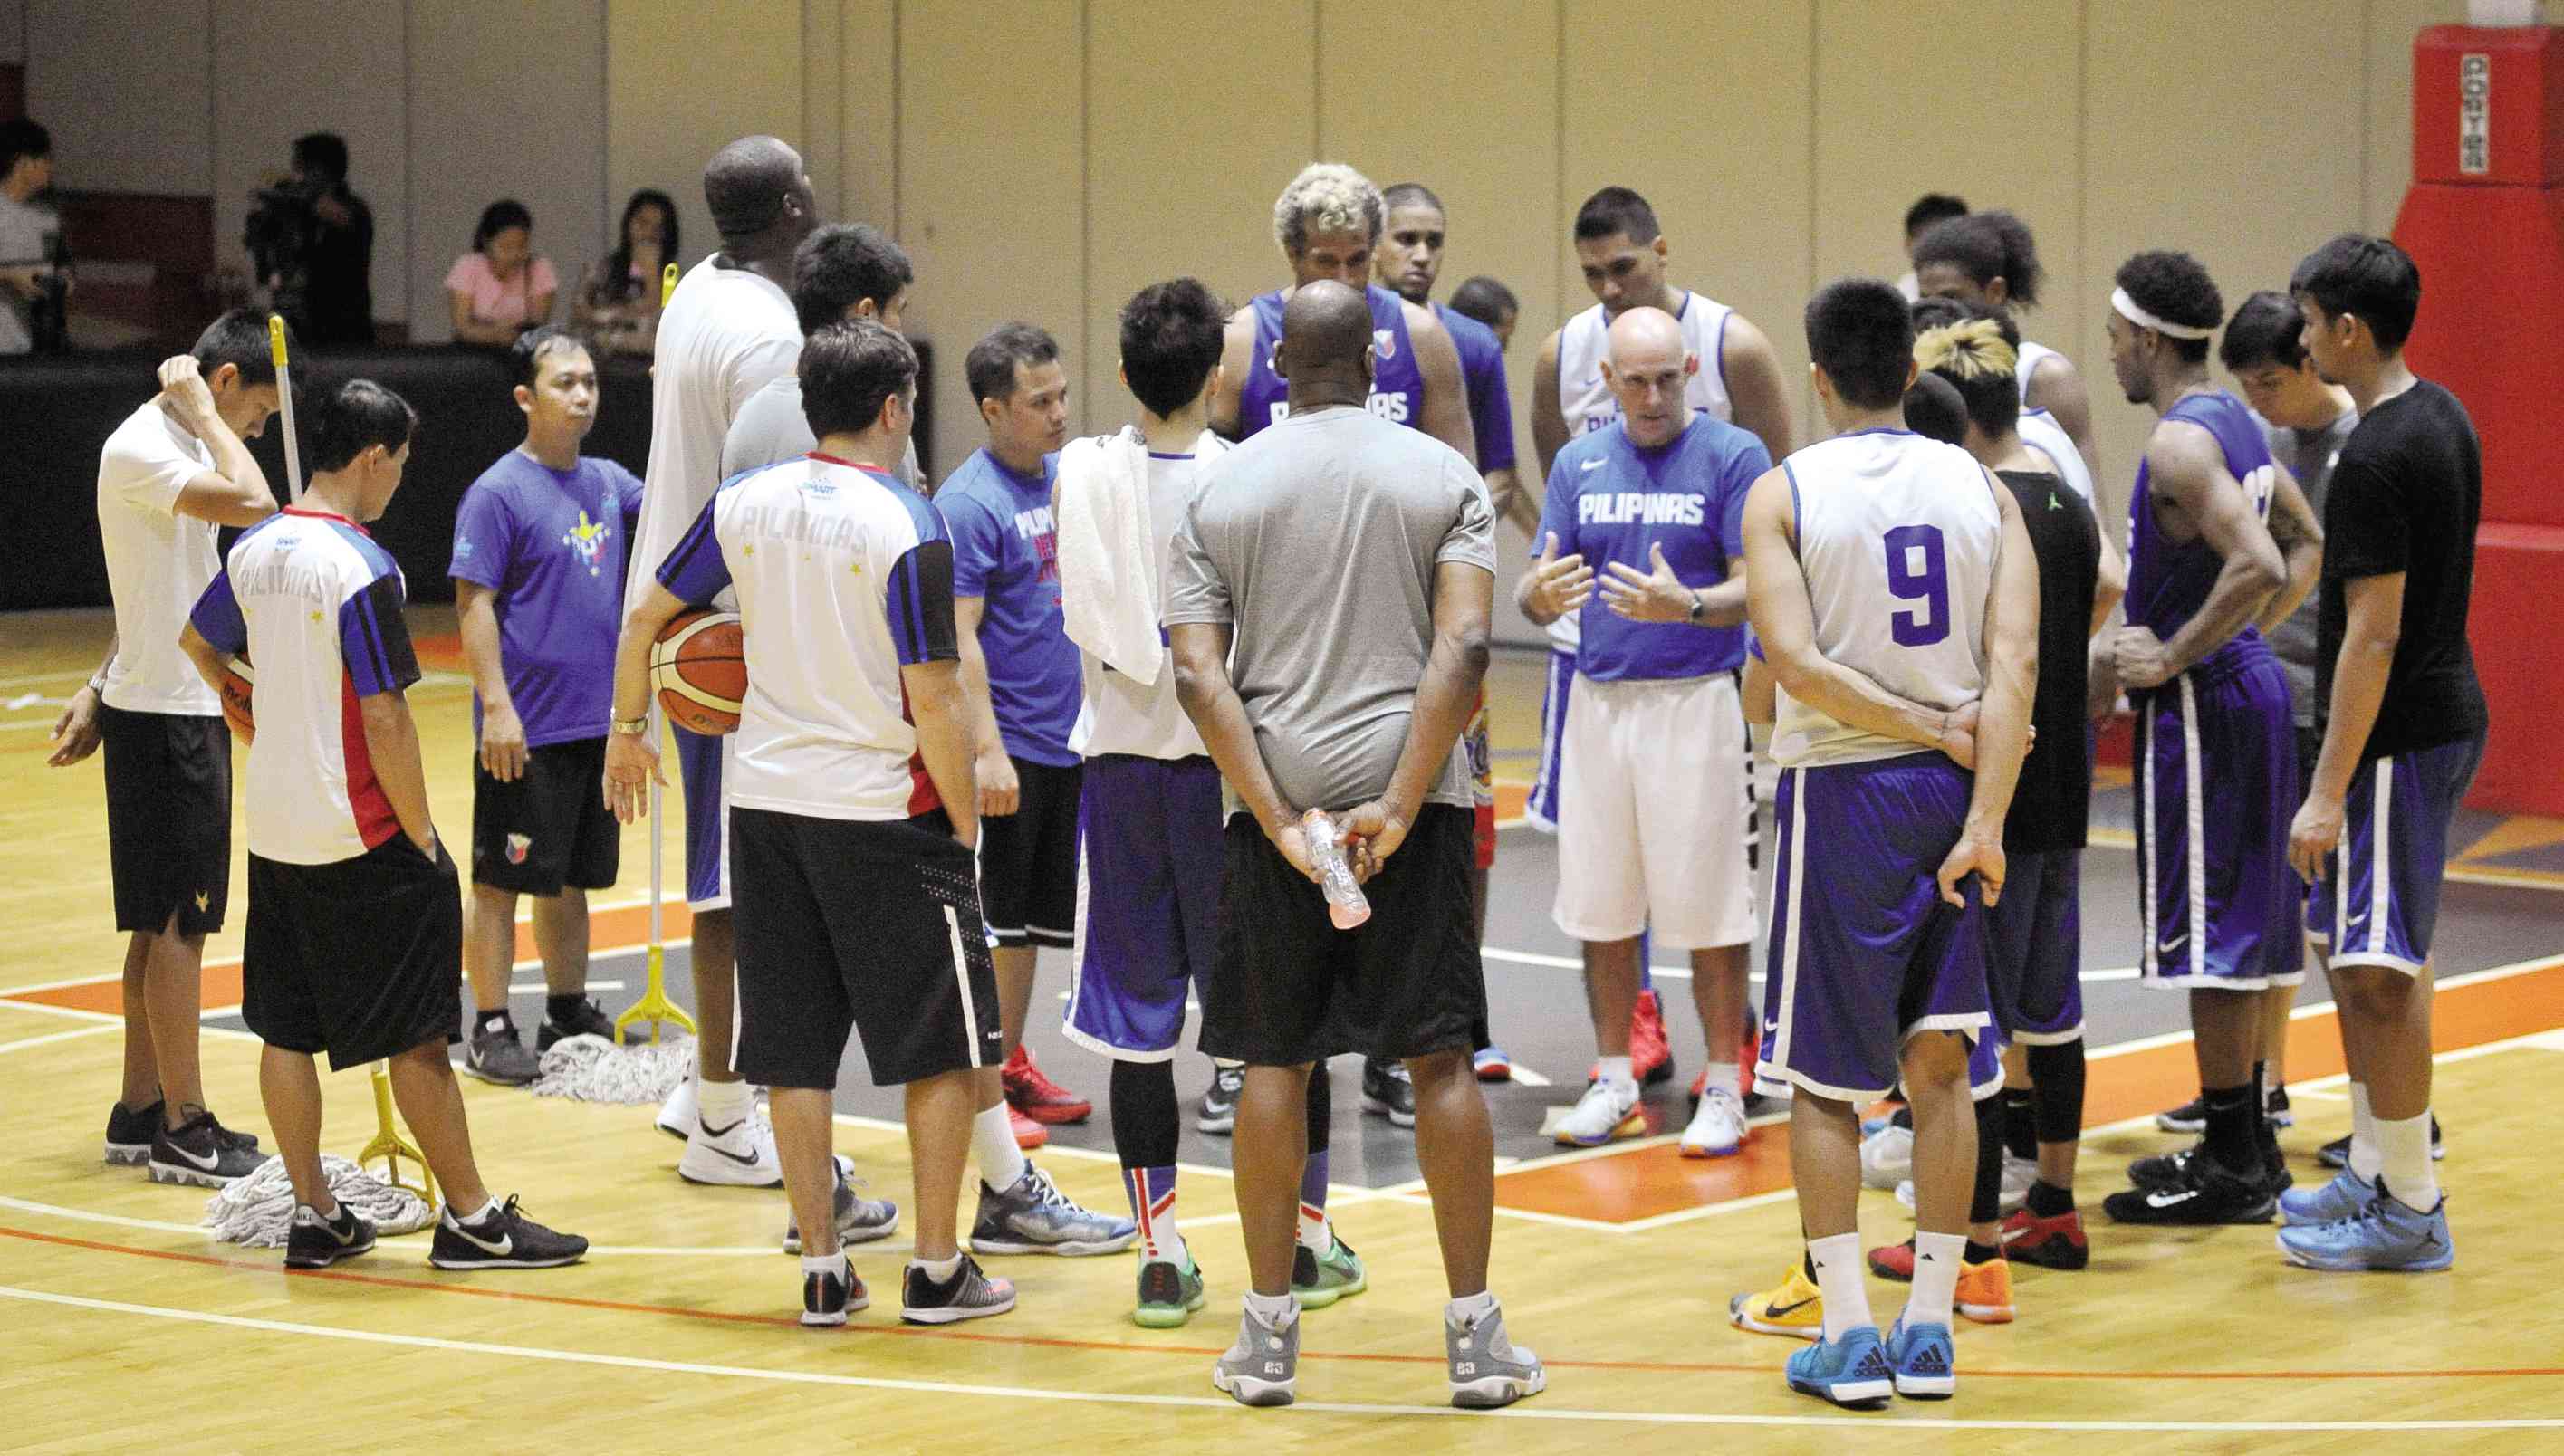 FILE - GILAS Pilipinas coach Tab Baldwin says the team’s goal is to win “every single game” in the Fiba Asia Championship in Hunan. Tristan Tamayo/INQUIRER.net